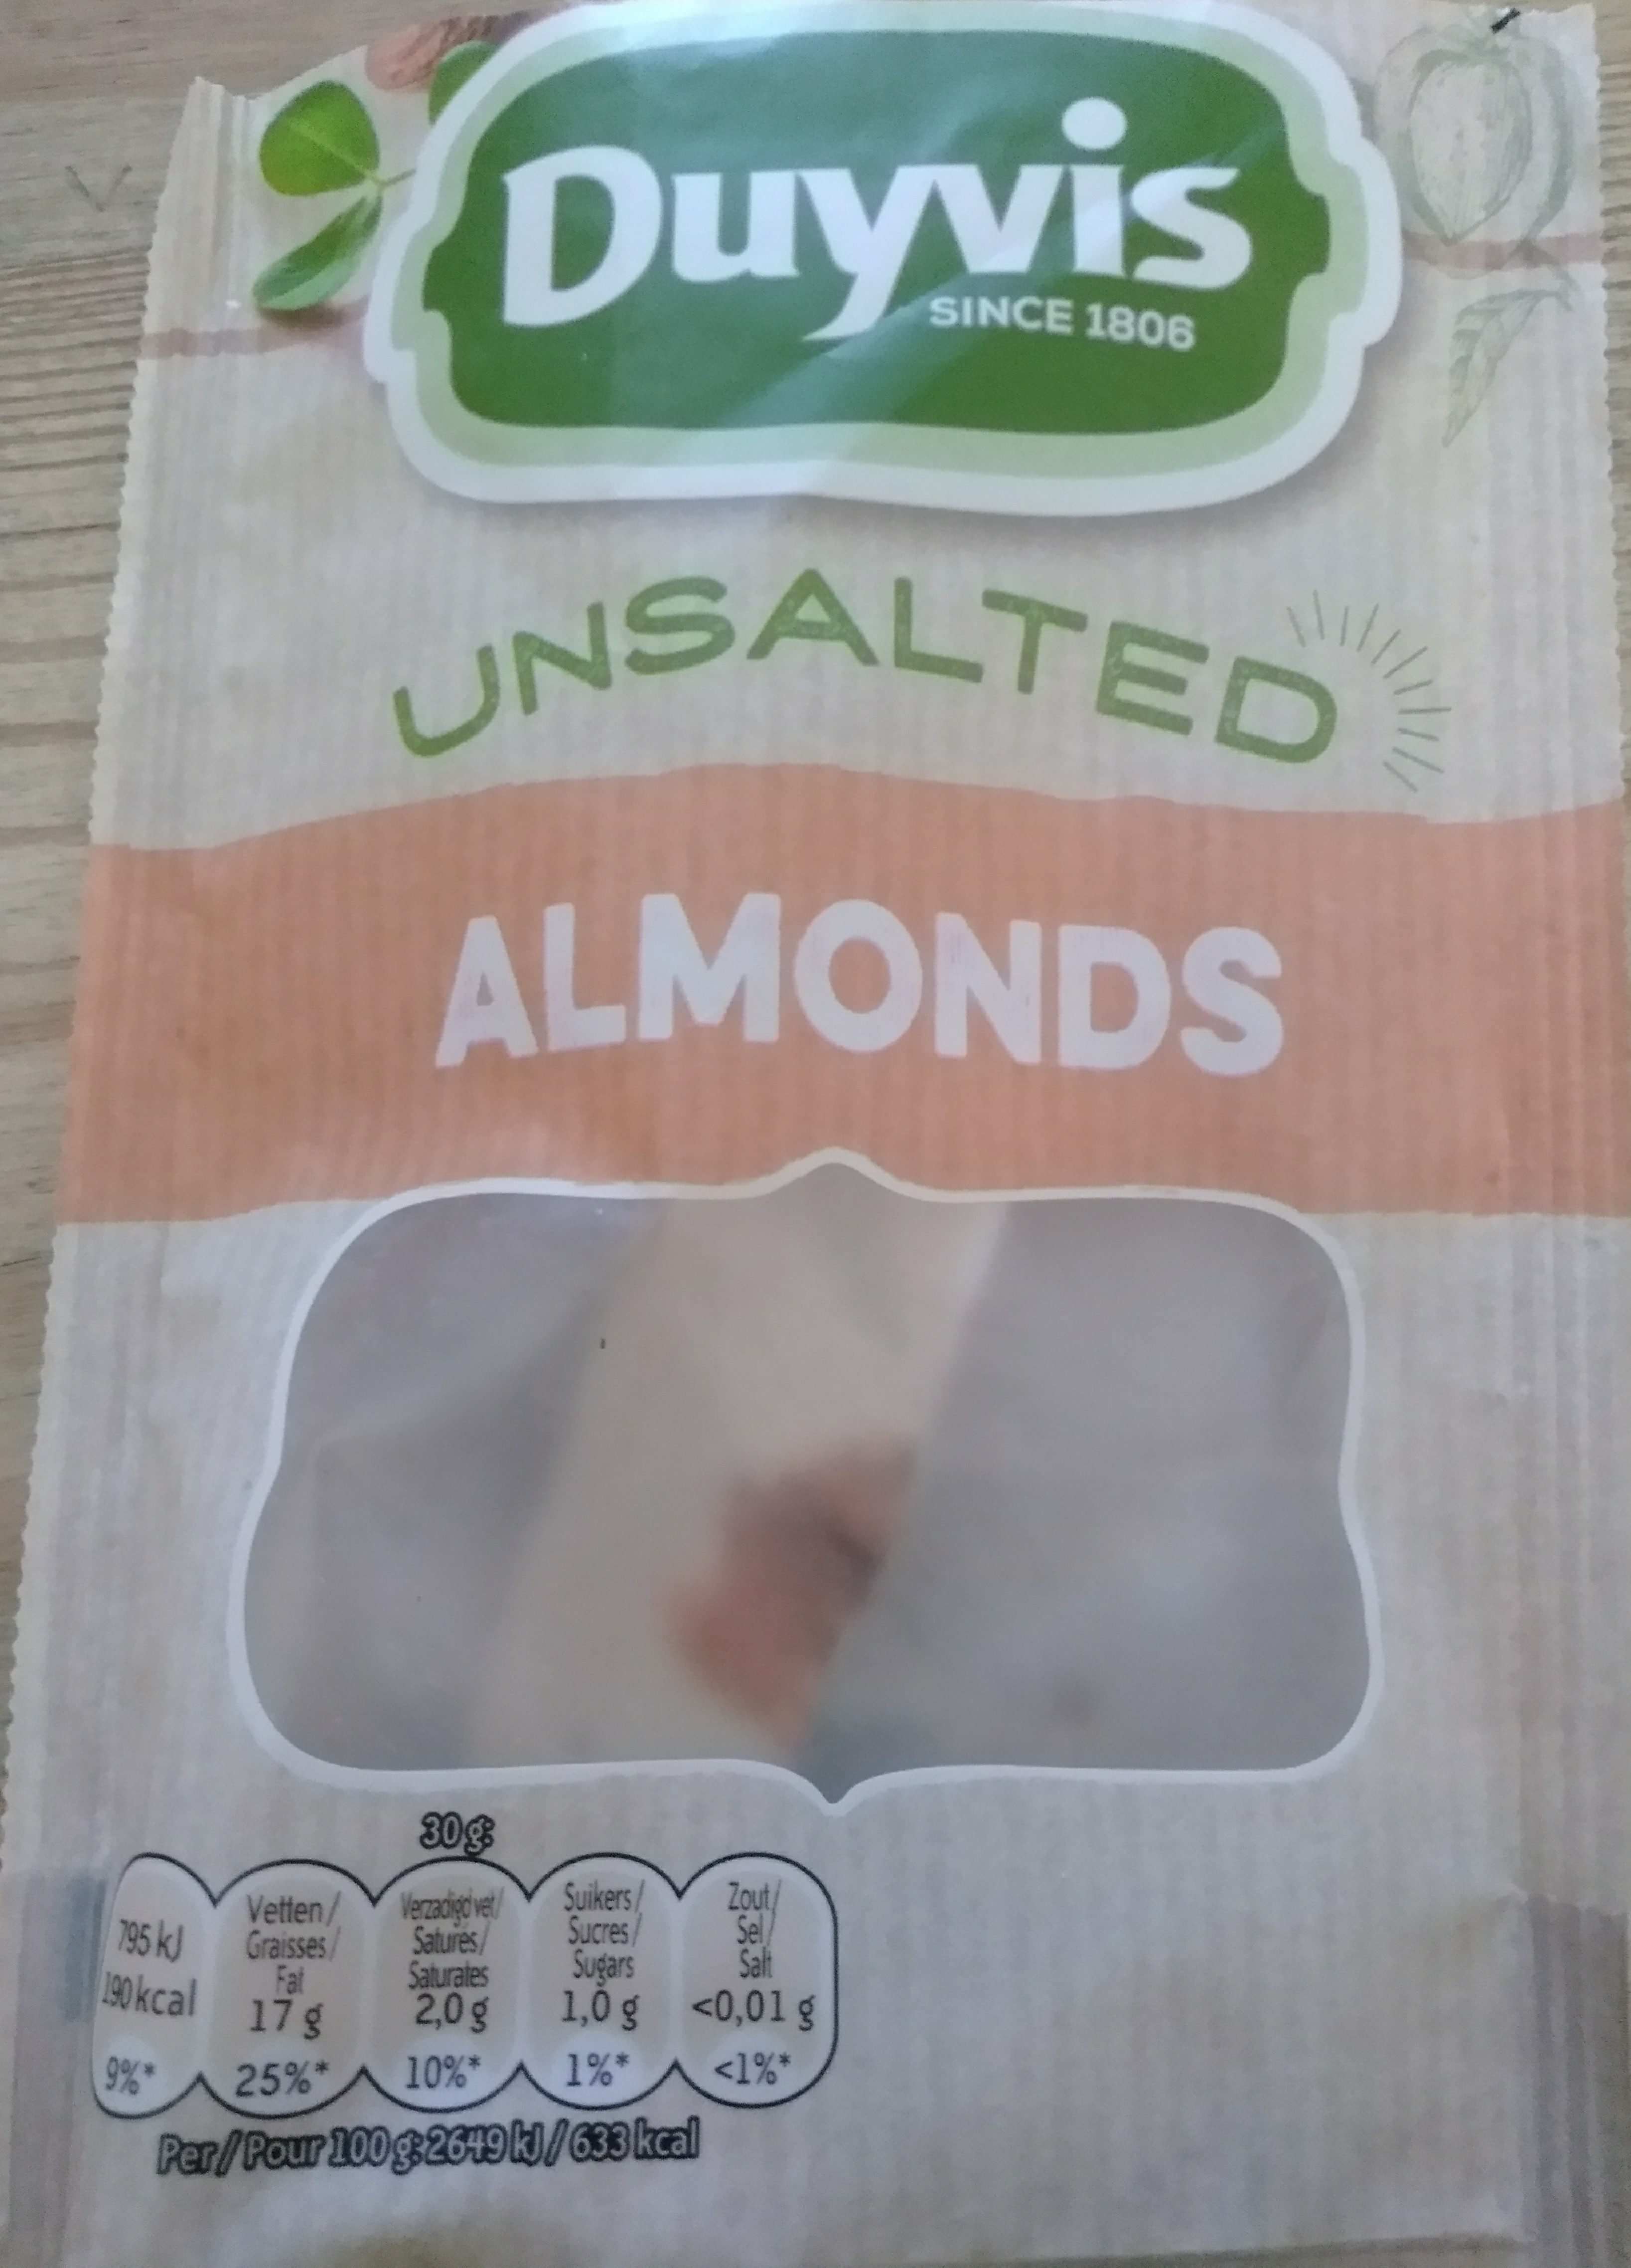 Duyvis Unsalted Almonds - Product - fr